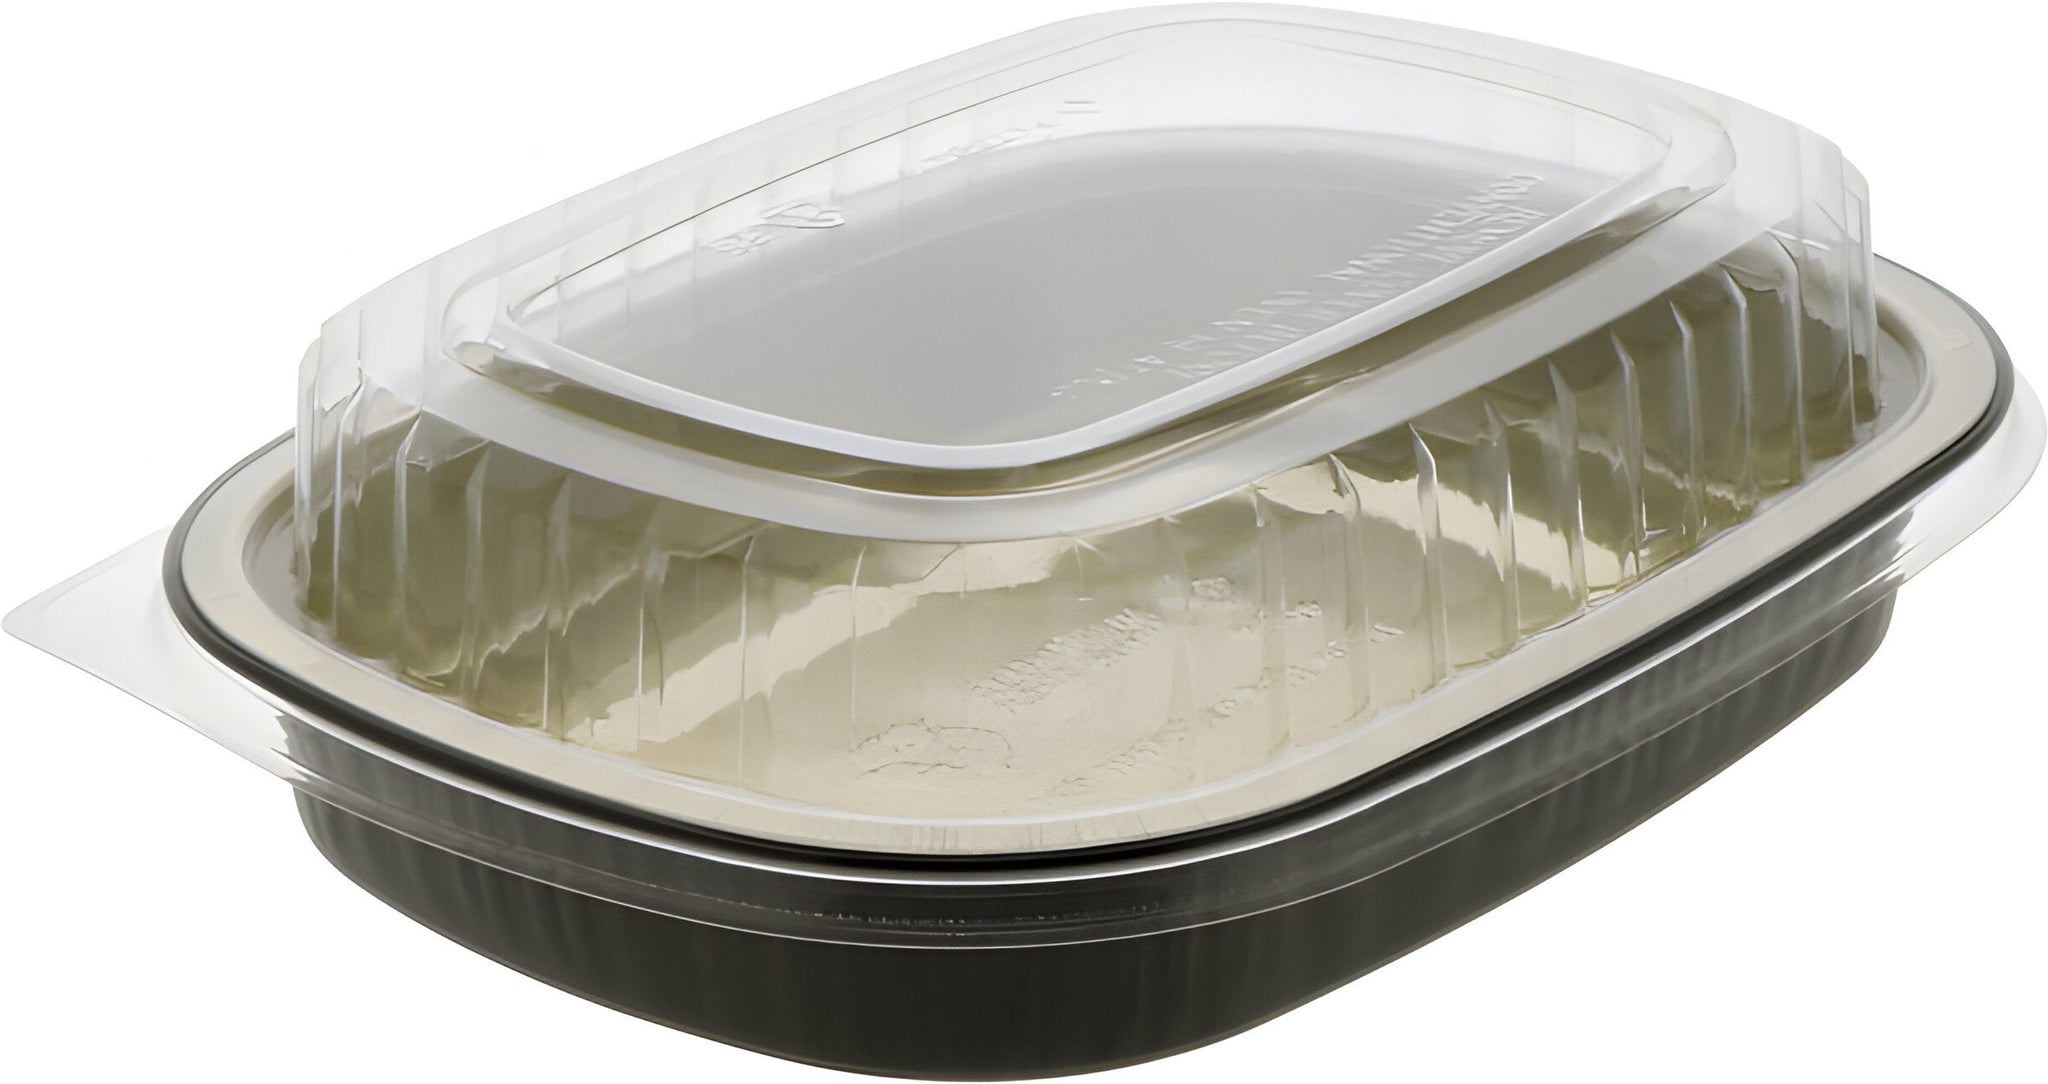 Pactiv Evergreen - 22 Oz Aluminum Carry-Out Container, 100/Cs - 6708WPSFG